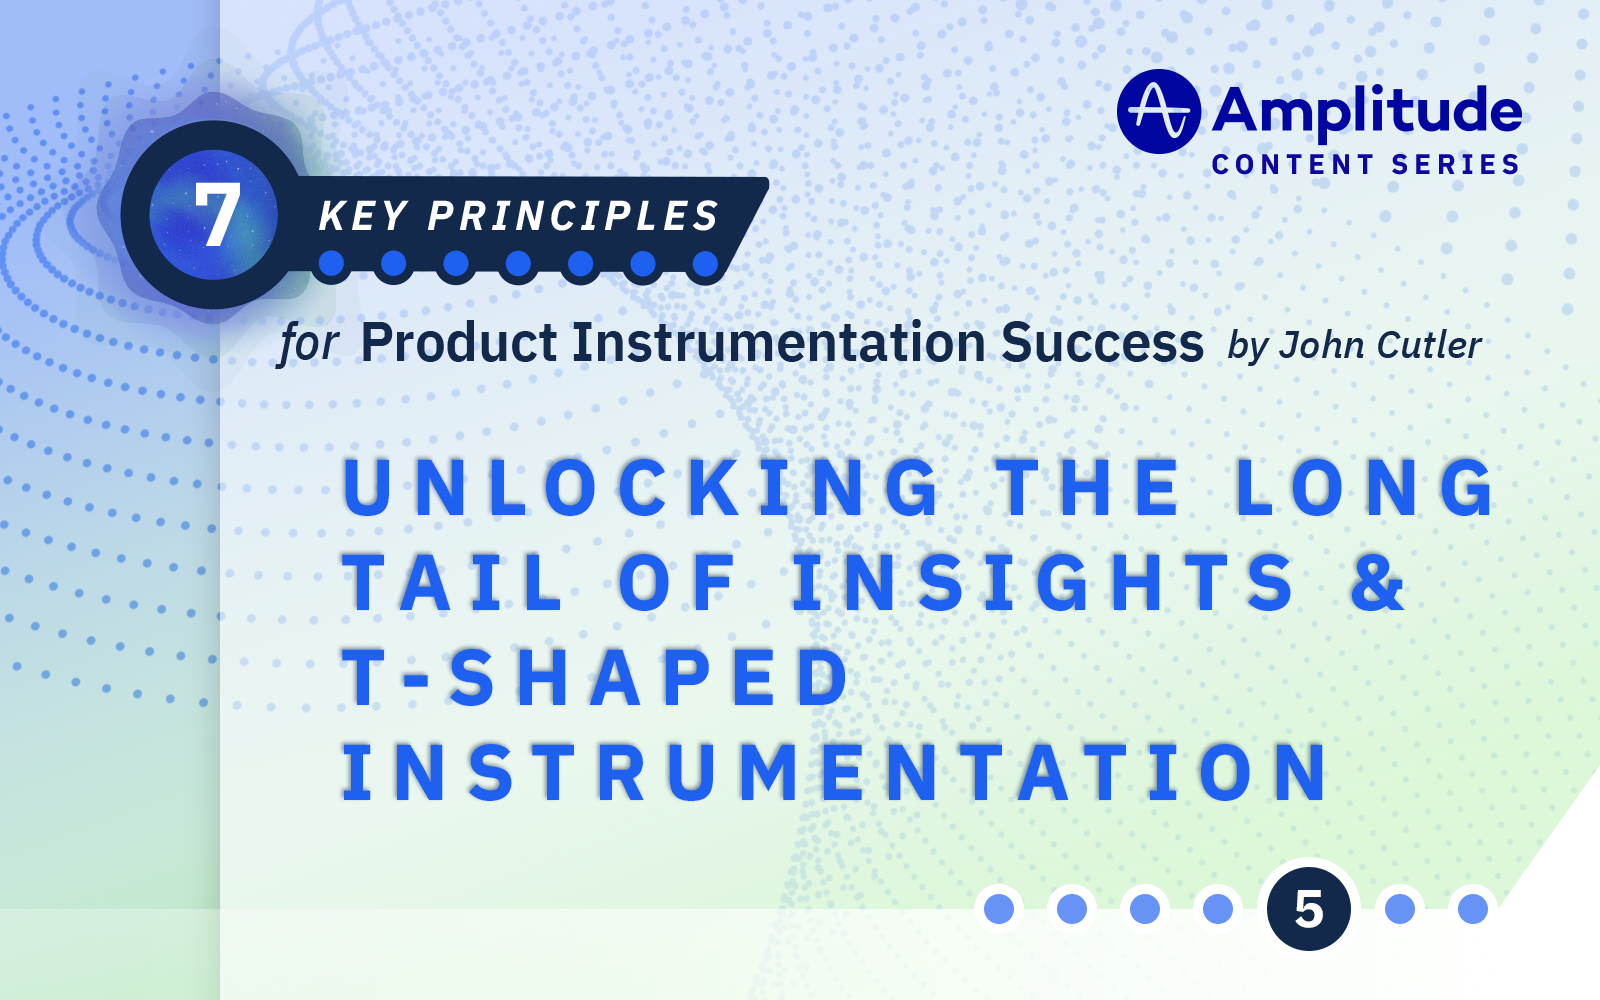 The Long Tail of Insights & T-Shaped Instrumentation